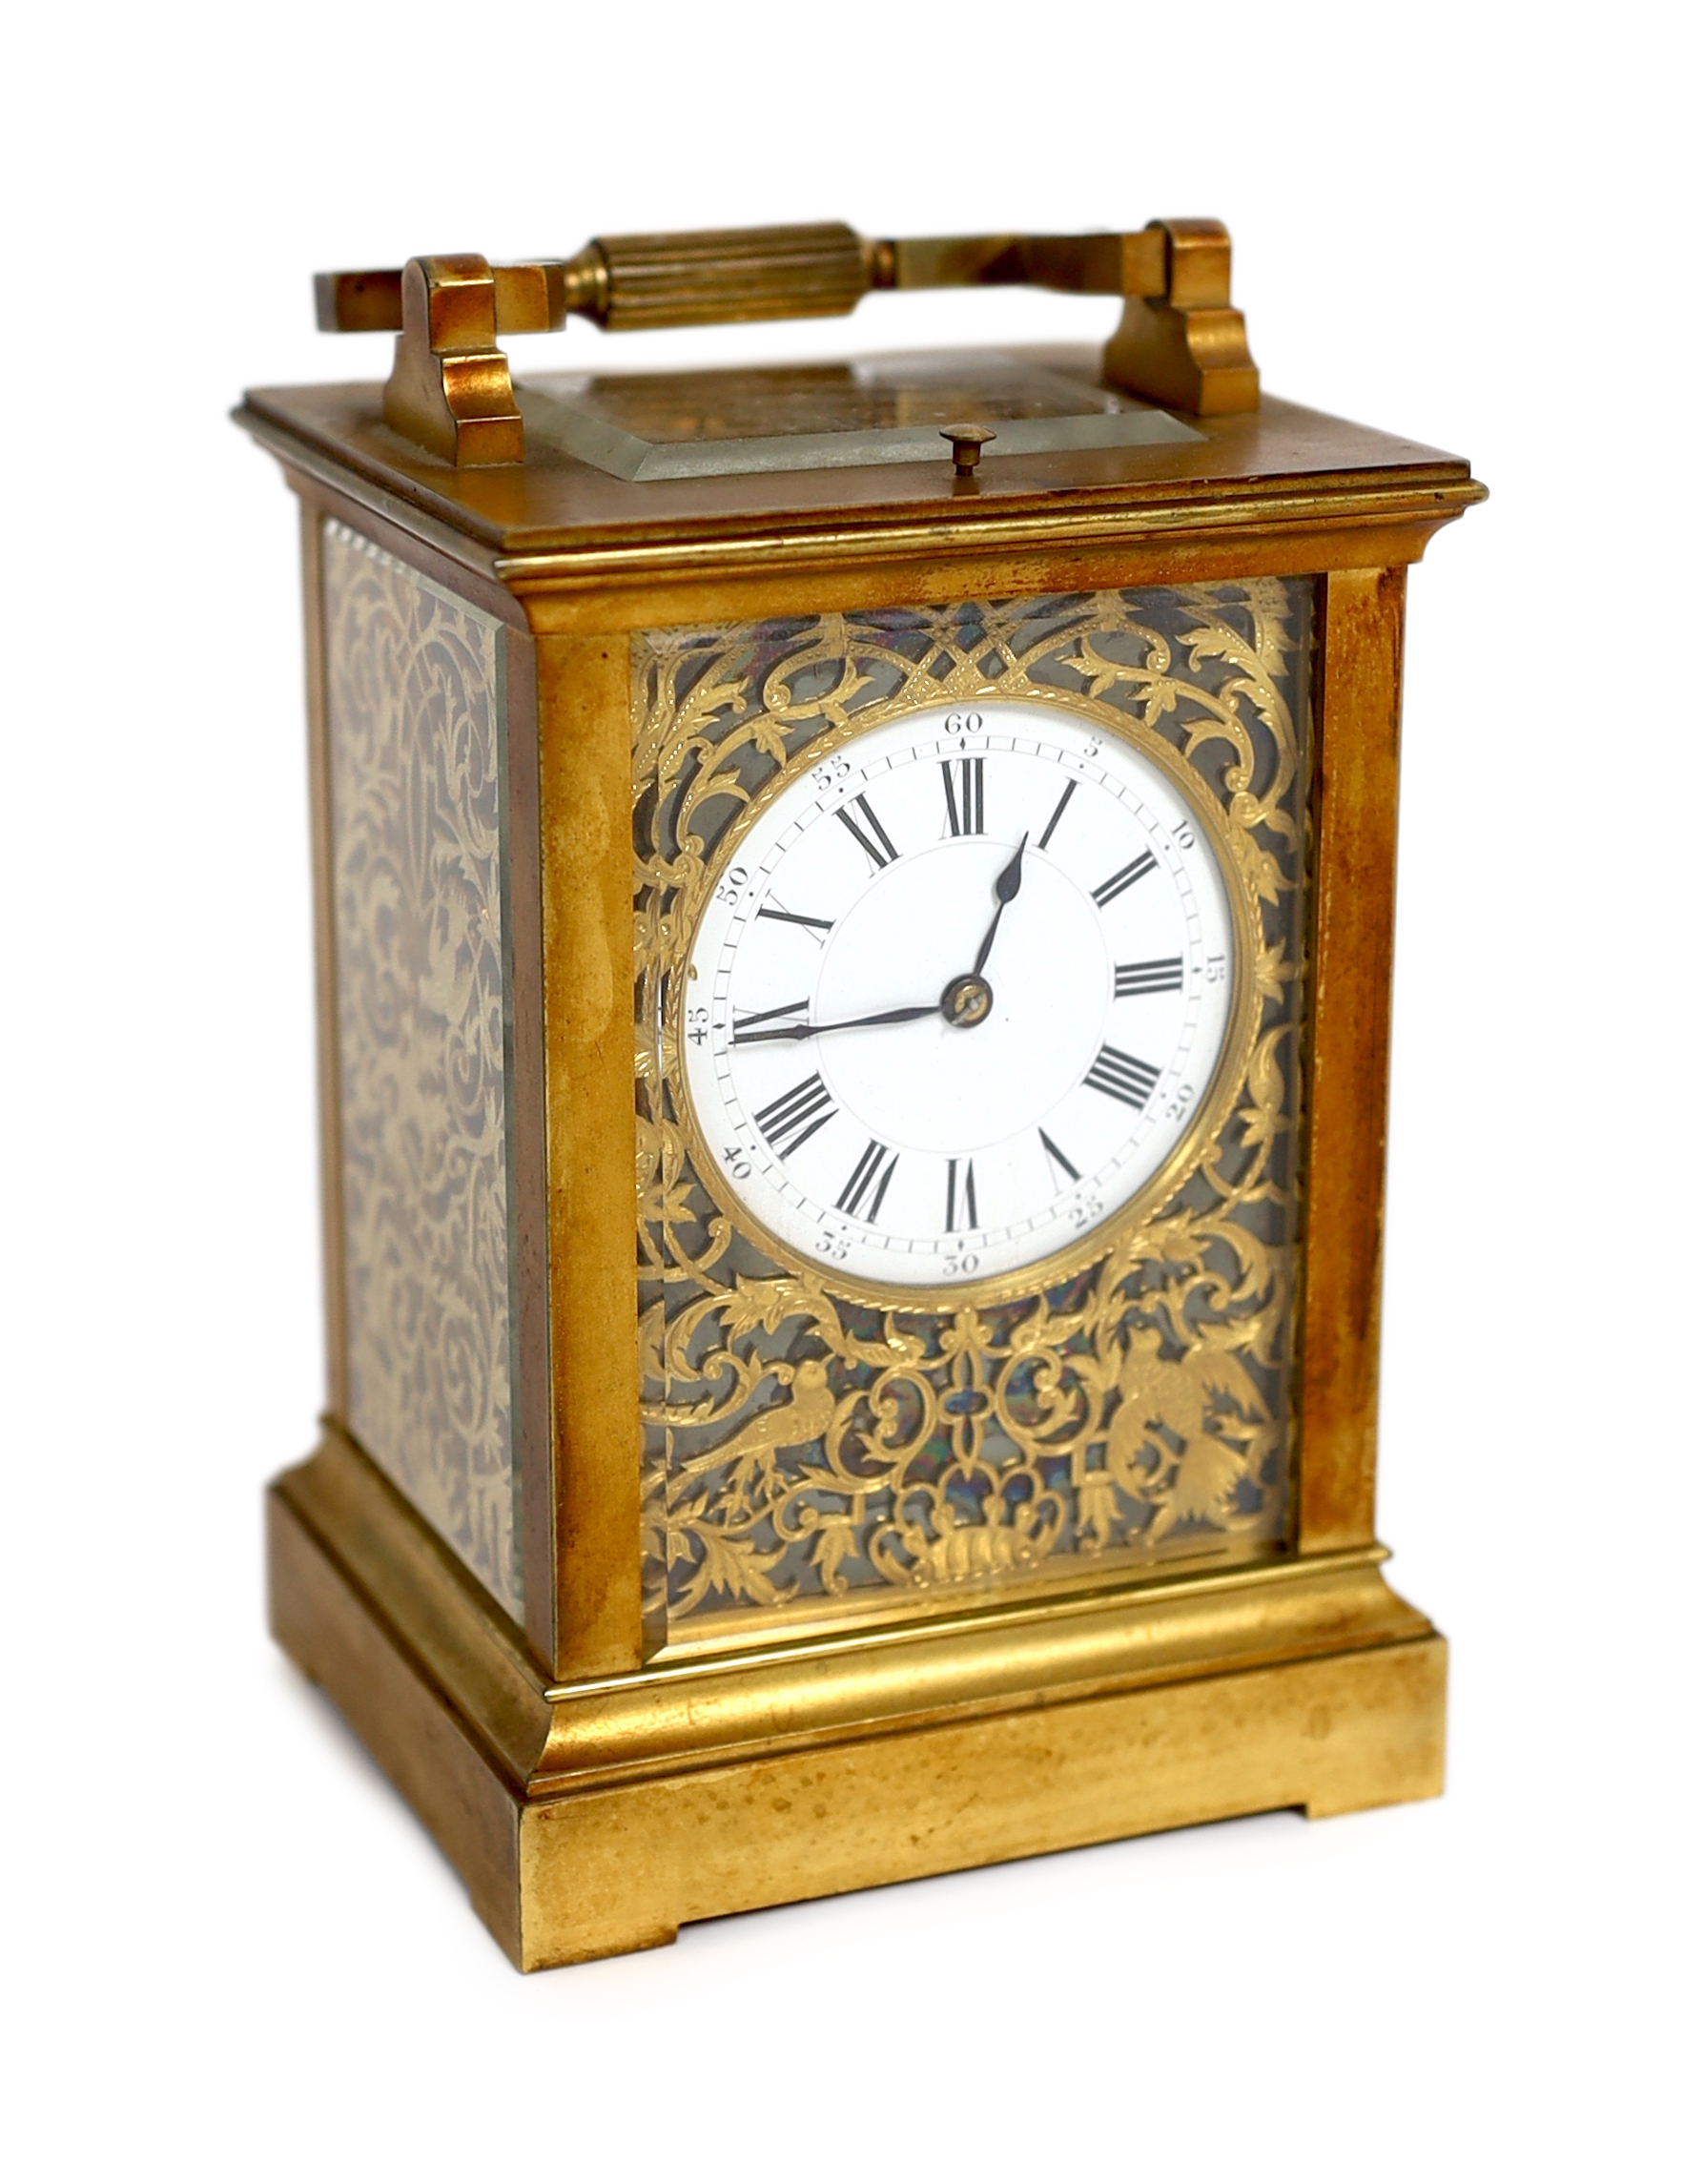 Henri Jacot. A late 19th century French quarter repeating carriage clock, circa 1885